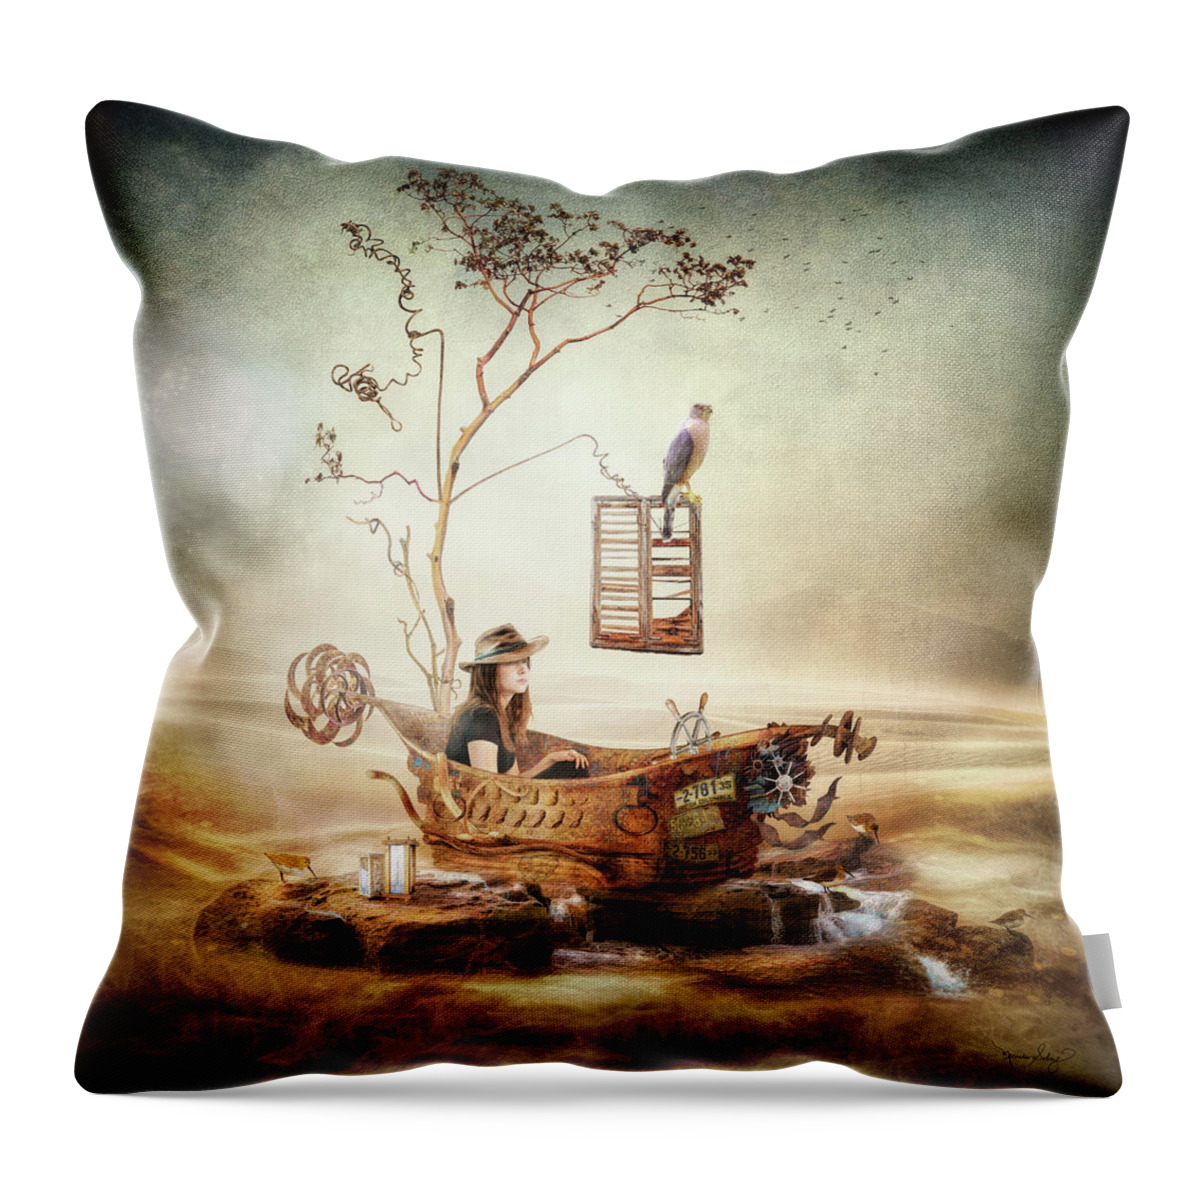 Steampunk Throw Pillow featuring the digital art Waiting for the Wind by Merrilee Soberg